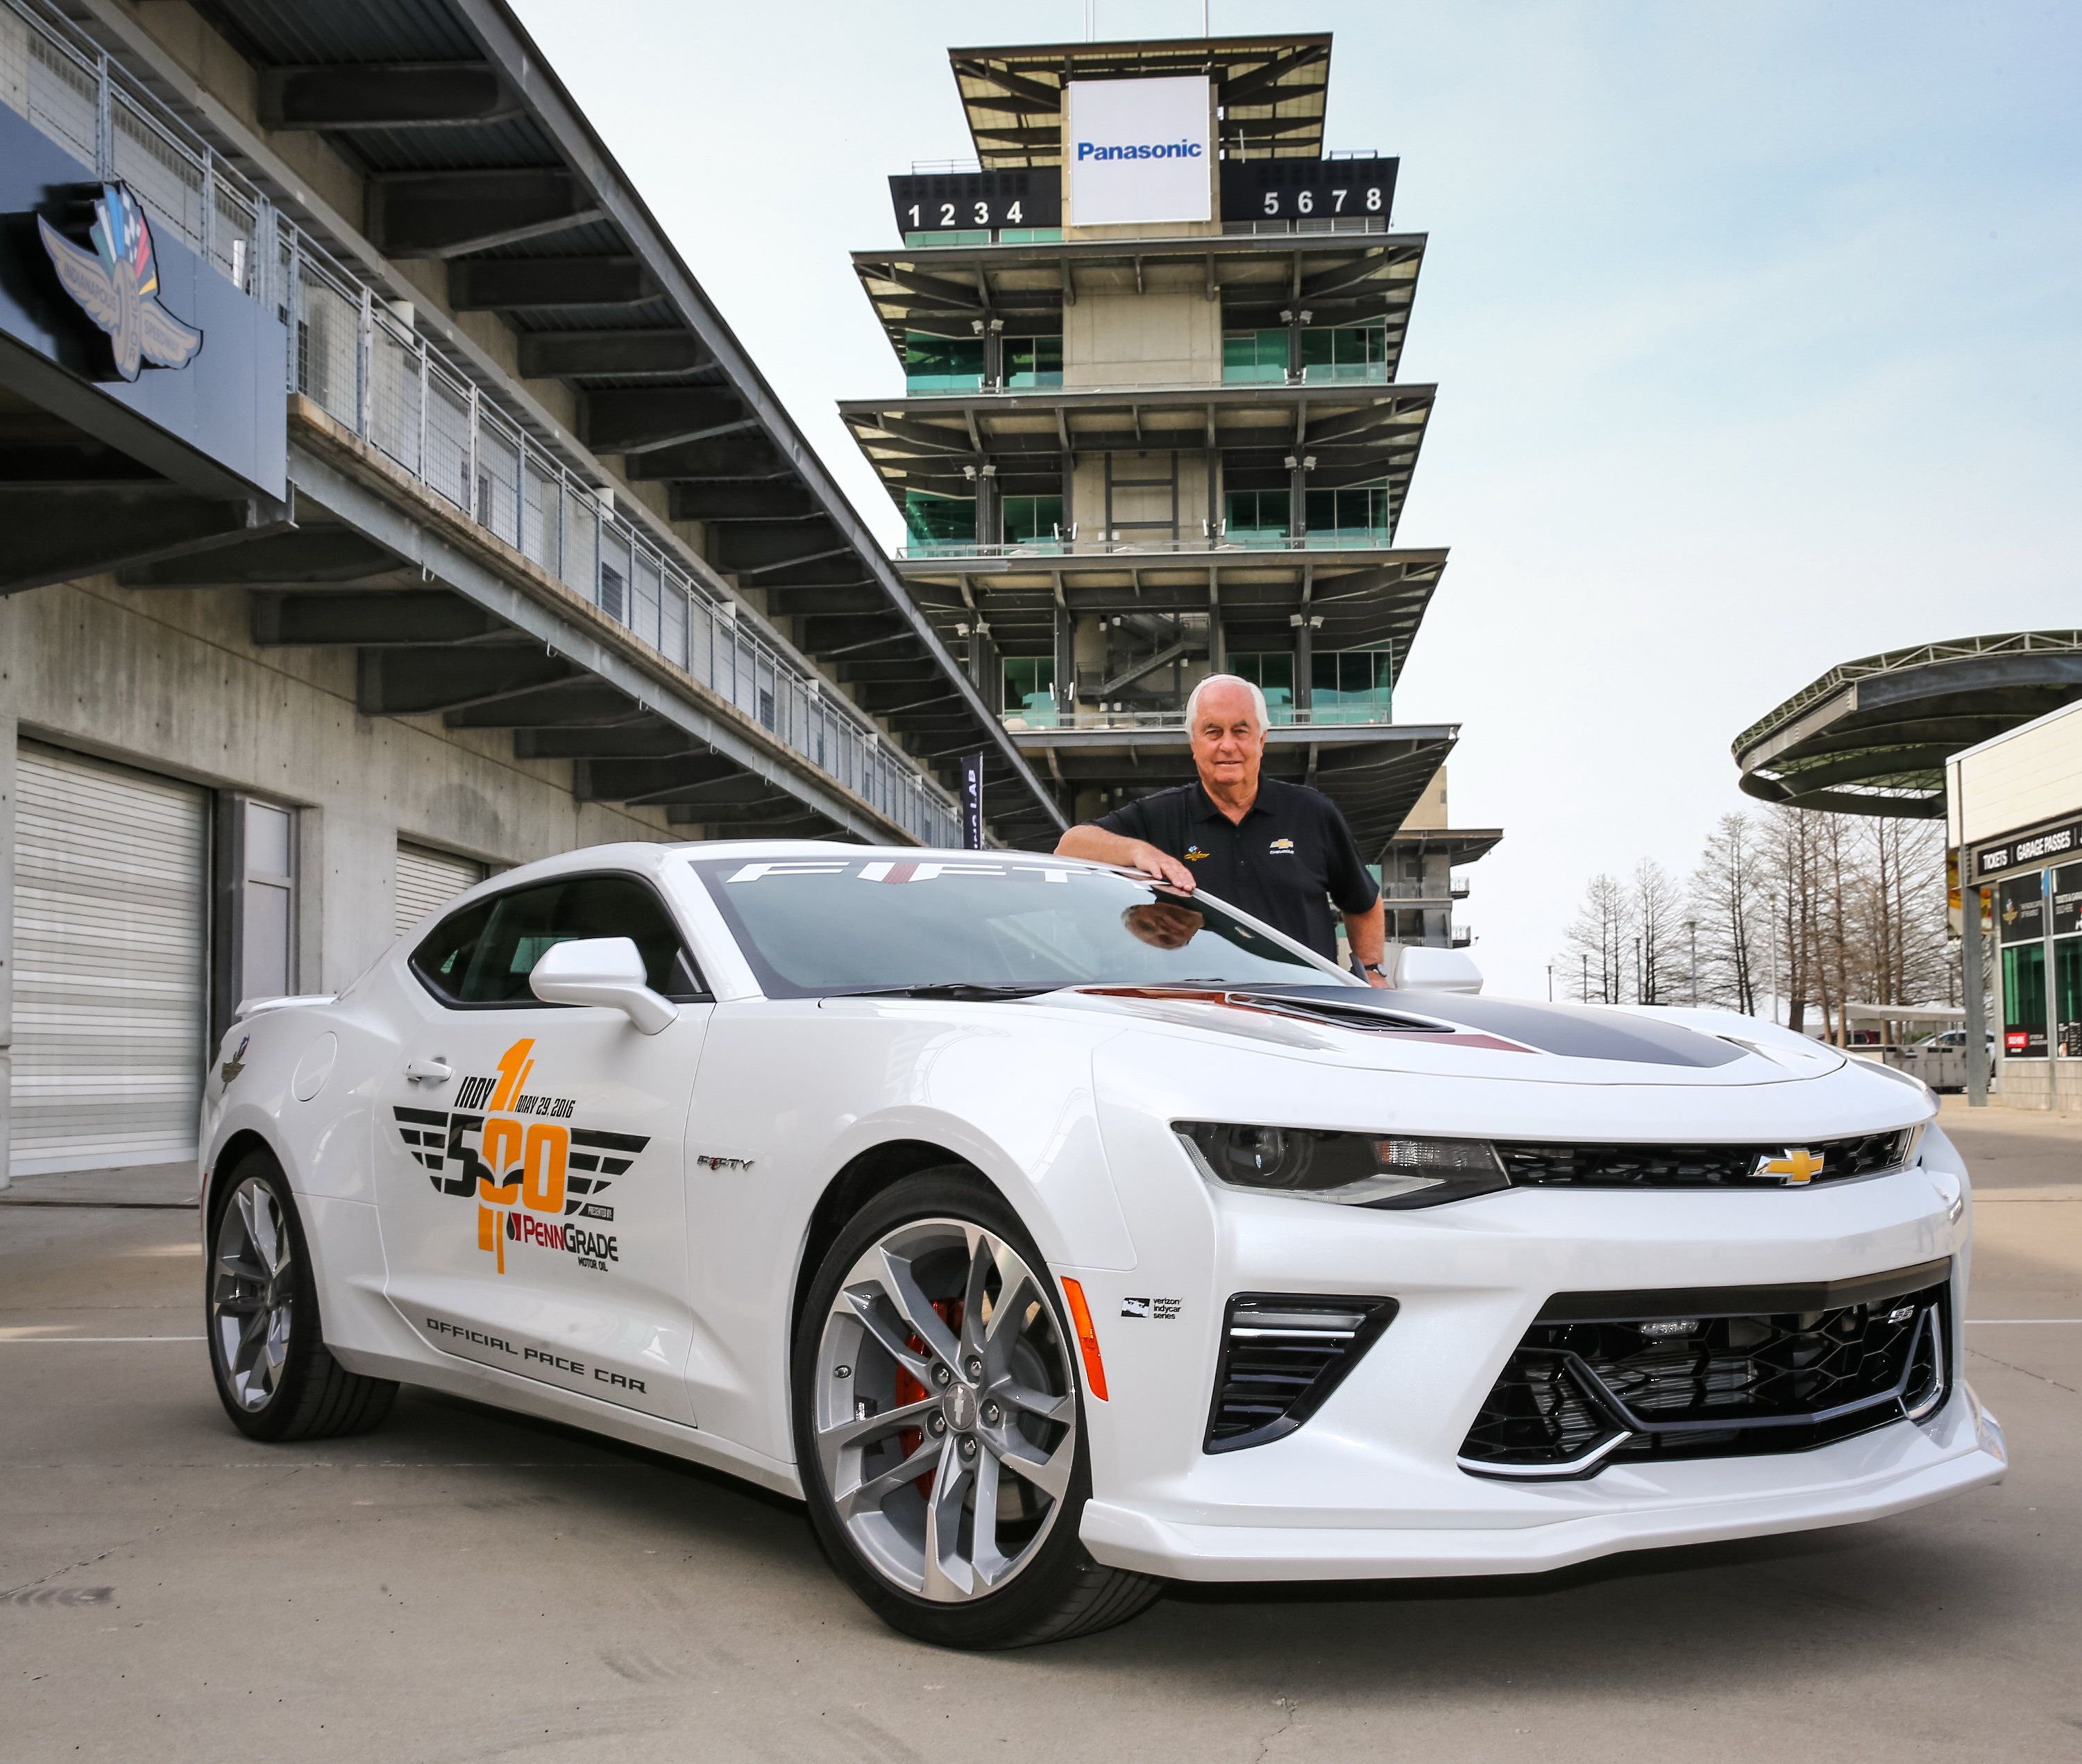 2016 Chevrolet Camaro SS Indy 500 Pace Car